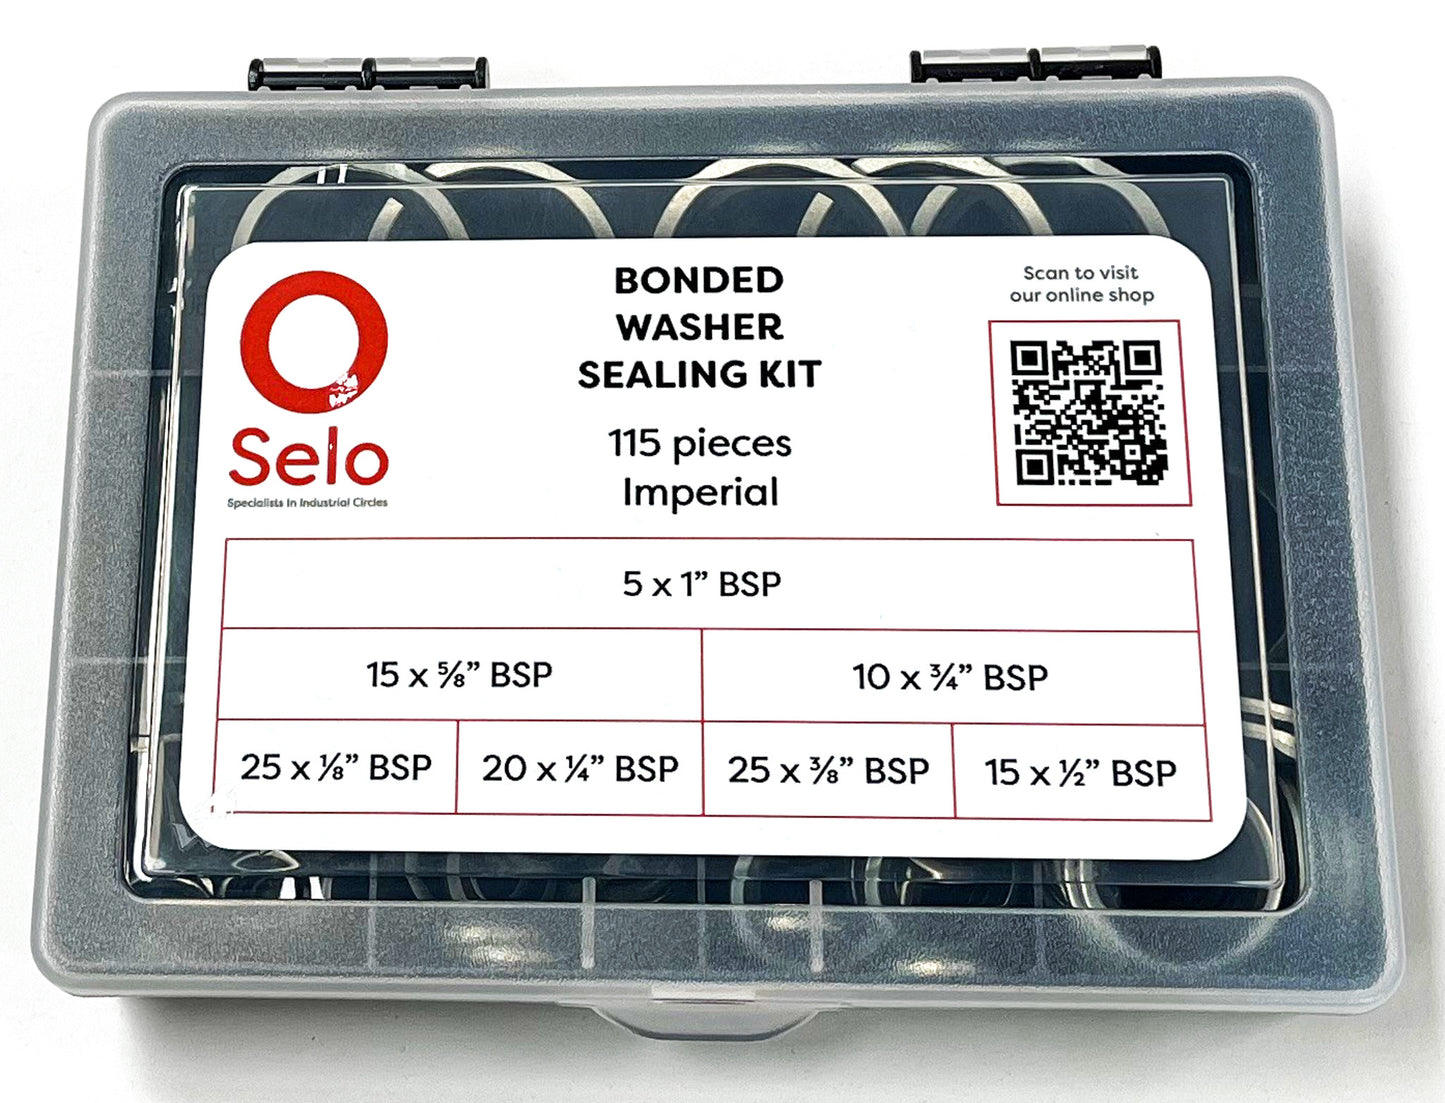 Bonded Washer Sealing Kit - Imperial - 115 Piece Self Centering Seal - BSP